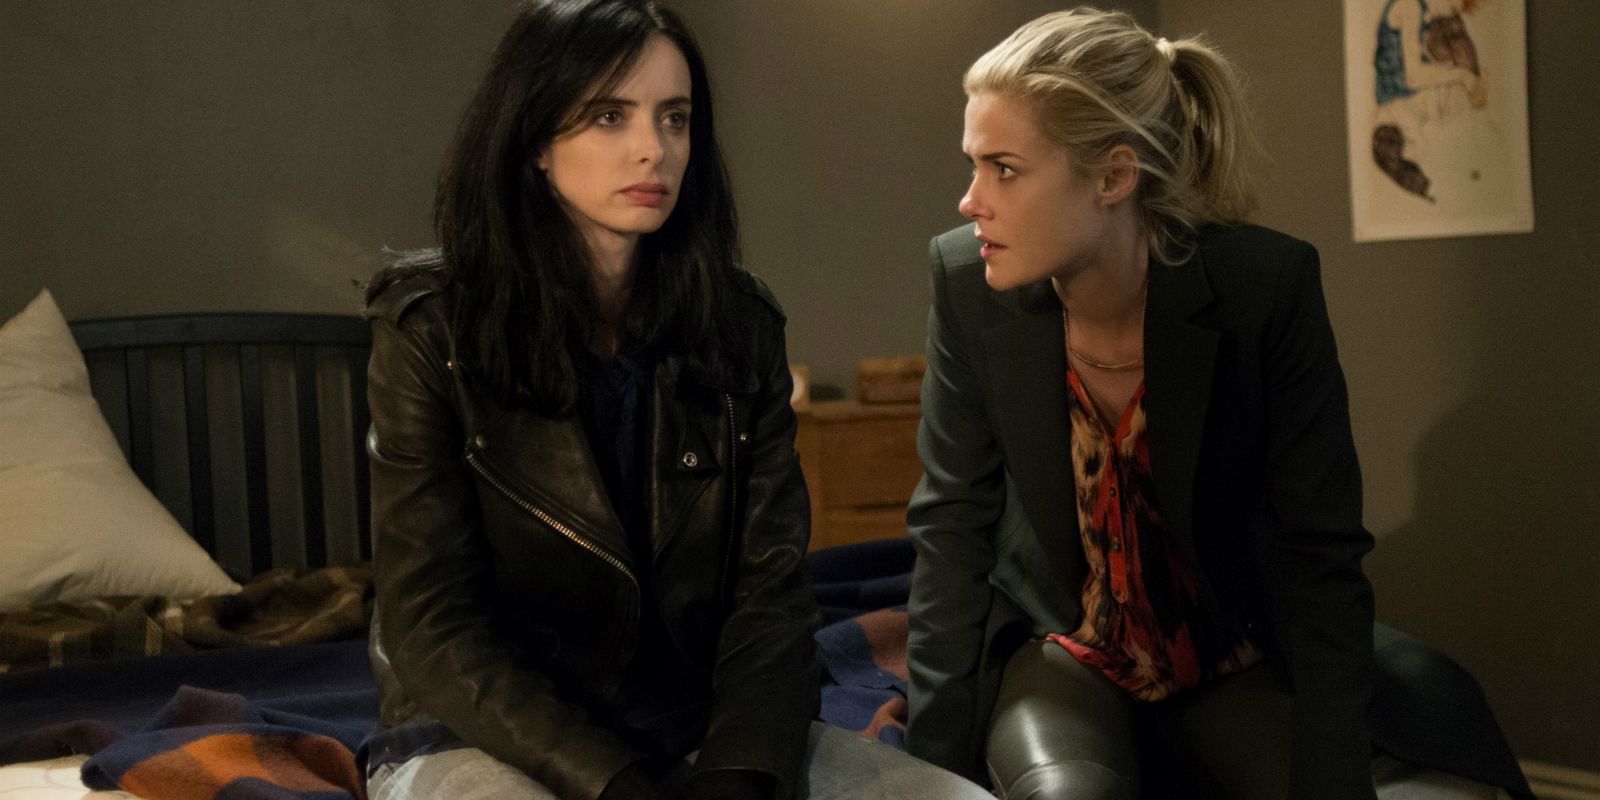 Krysten Ritter as Jessica and Rachael Taylor as Trish sit side by side in Jessica Jones